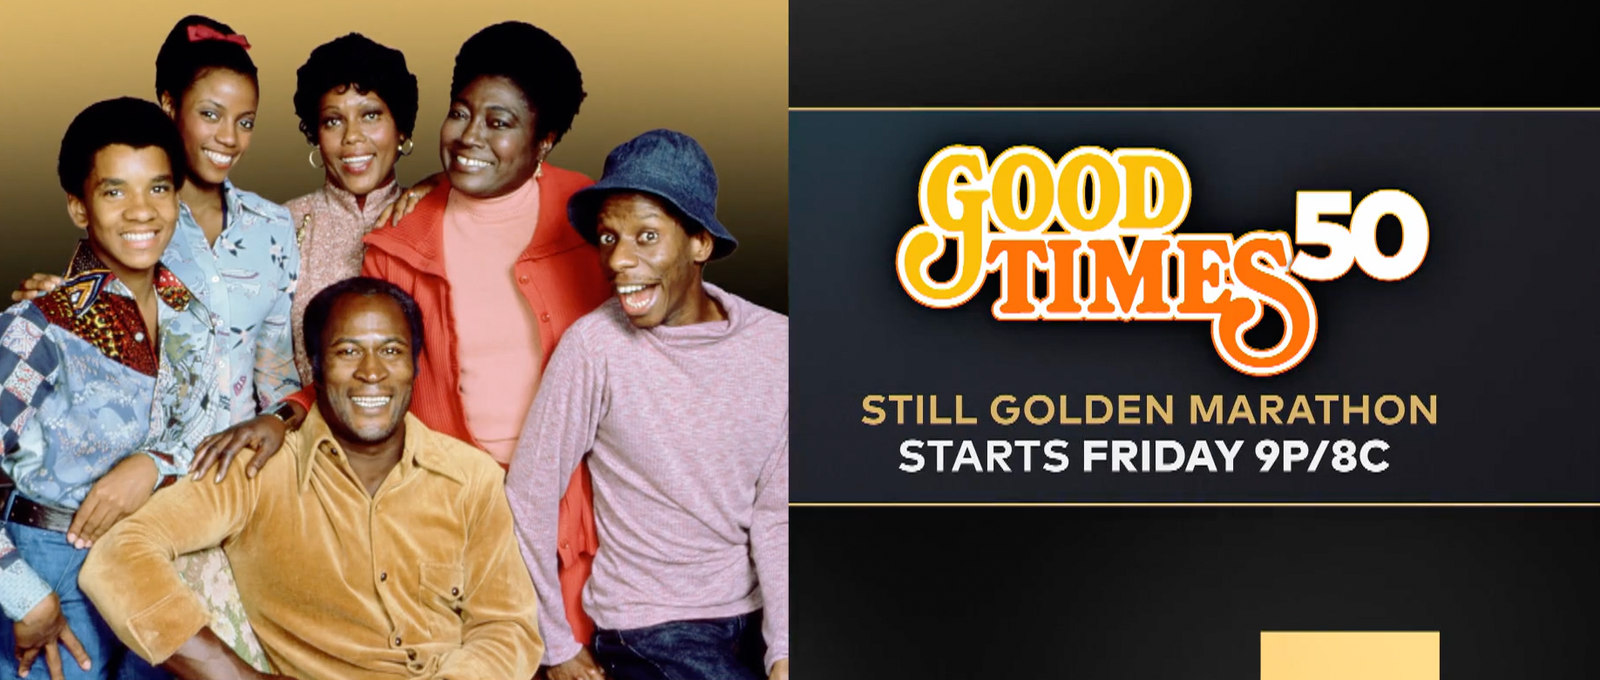 TV One’s “Good Times” 50th Anniversary Celebration